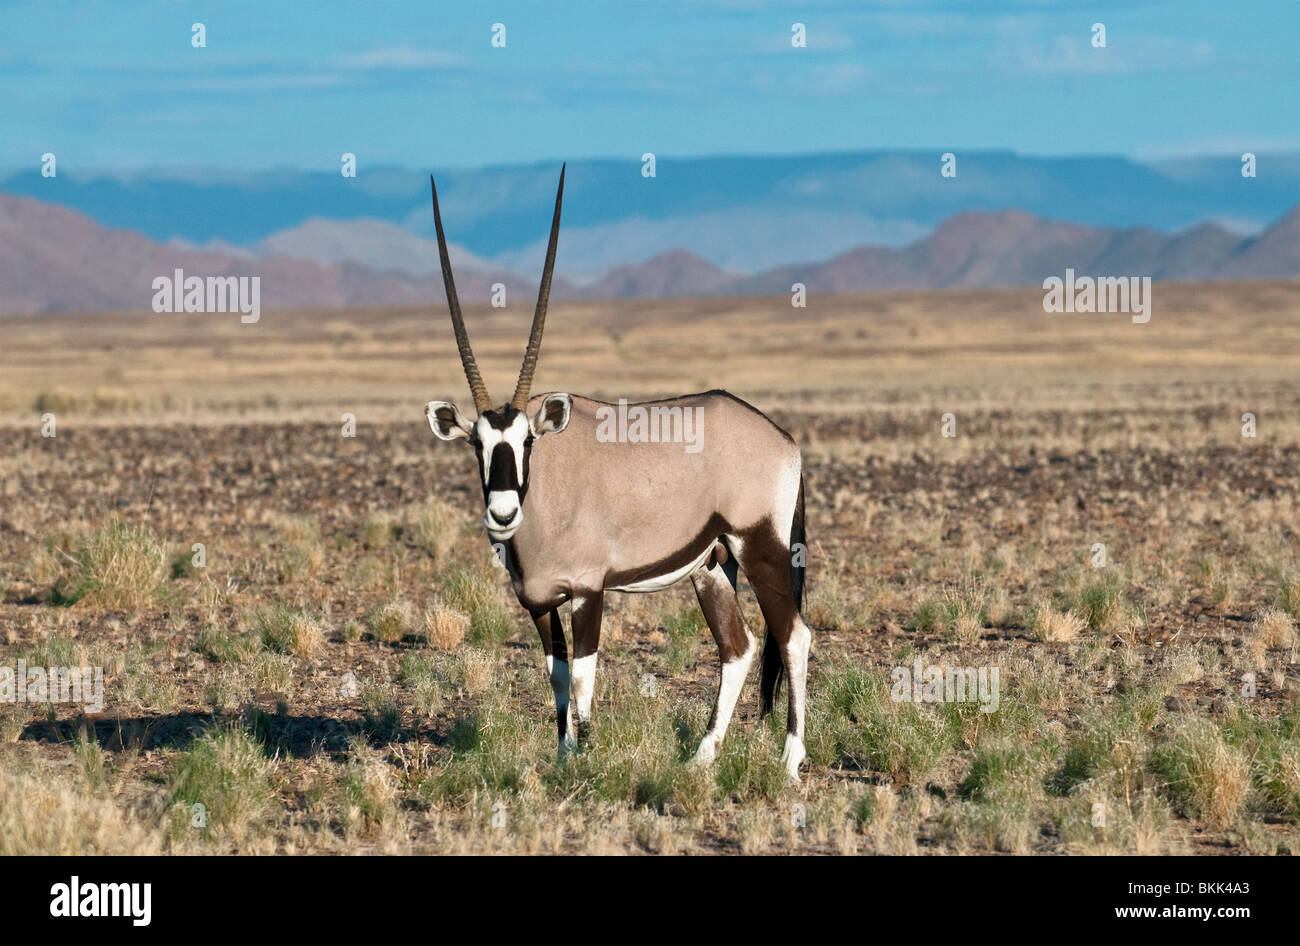 Gemsbok or Oryx by the roadside to Sossusvlei near Sesriem with the Namib Naukluft Mountain Range in the Distance, Namibia Stock Photo